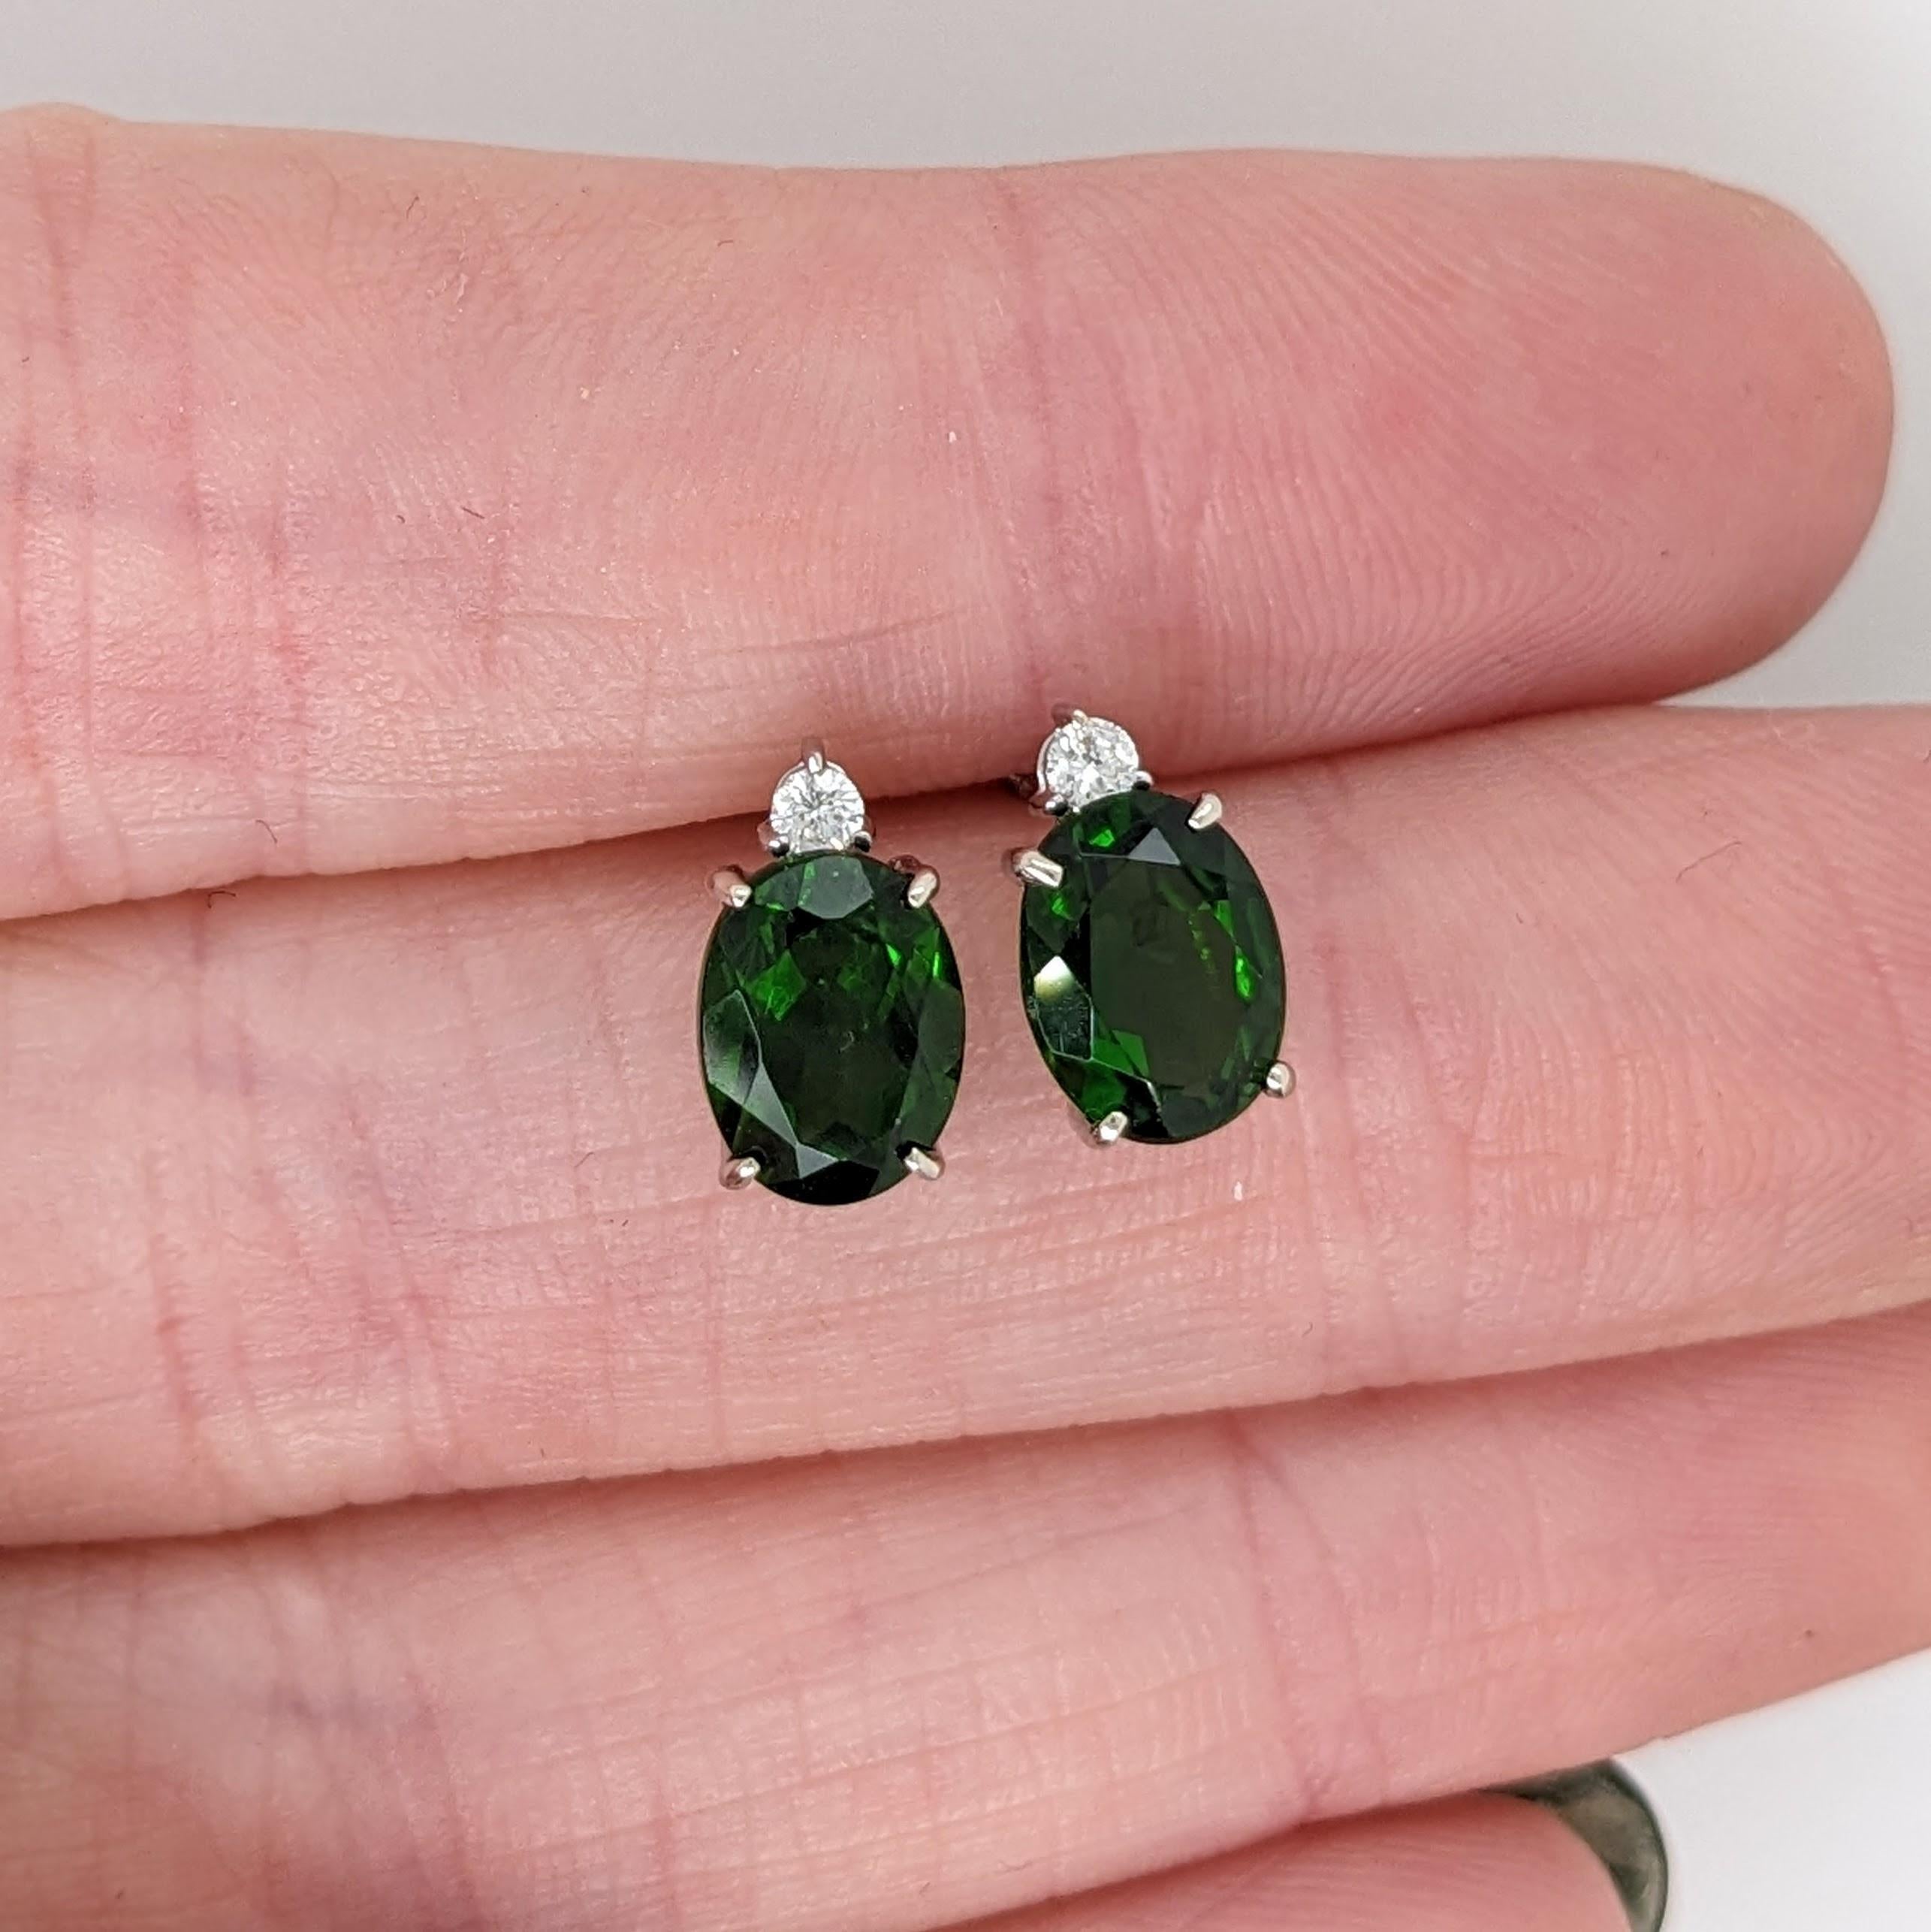 These fabulous chrome diopside studs are an absolutely stunning rich green color! A beautiful diamond accent gives a little extra sparkle to these gorgeous earrings. 😊

Specifications:

Item Type: Earrings
Centre Stone: Chrome Diopside
Treatment: